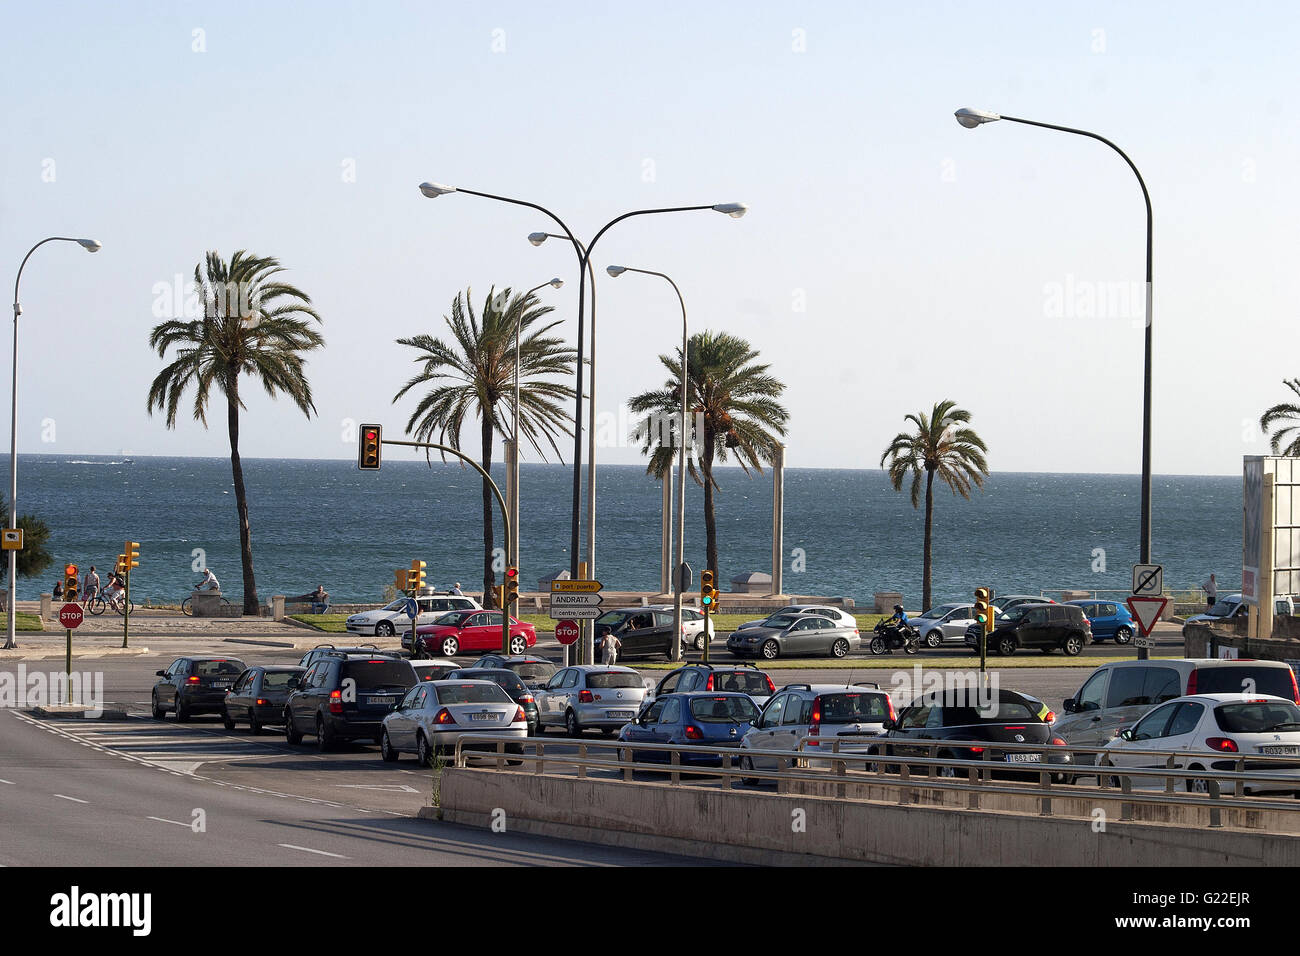 a poetic picture of cars in line at traffic light in the city of Palma, Palma de Mallorca, Spain, seaside, tourism, holidays Stock Photo